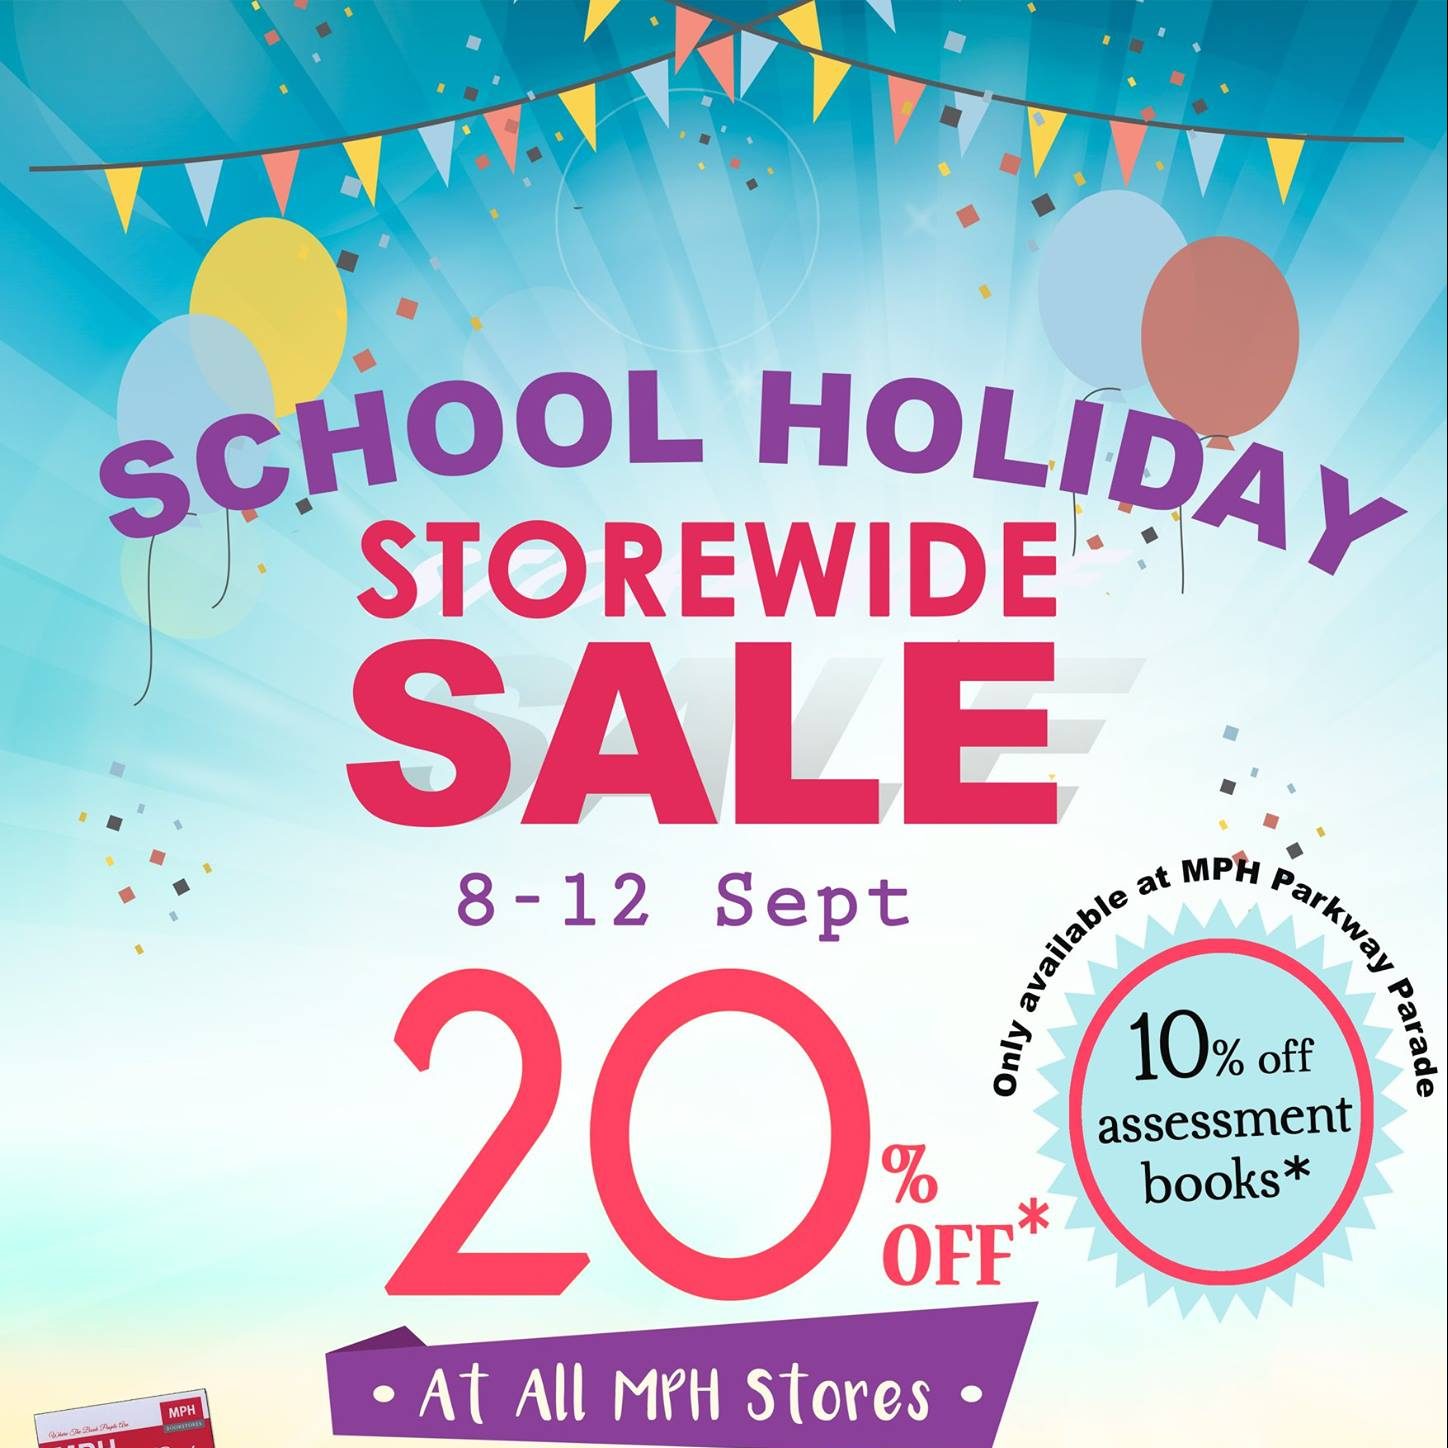 MPH Bookstores Singapore School Holiday Storewide Sale 20% Off Promotion 8 to 12 Sep 2016